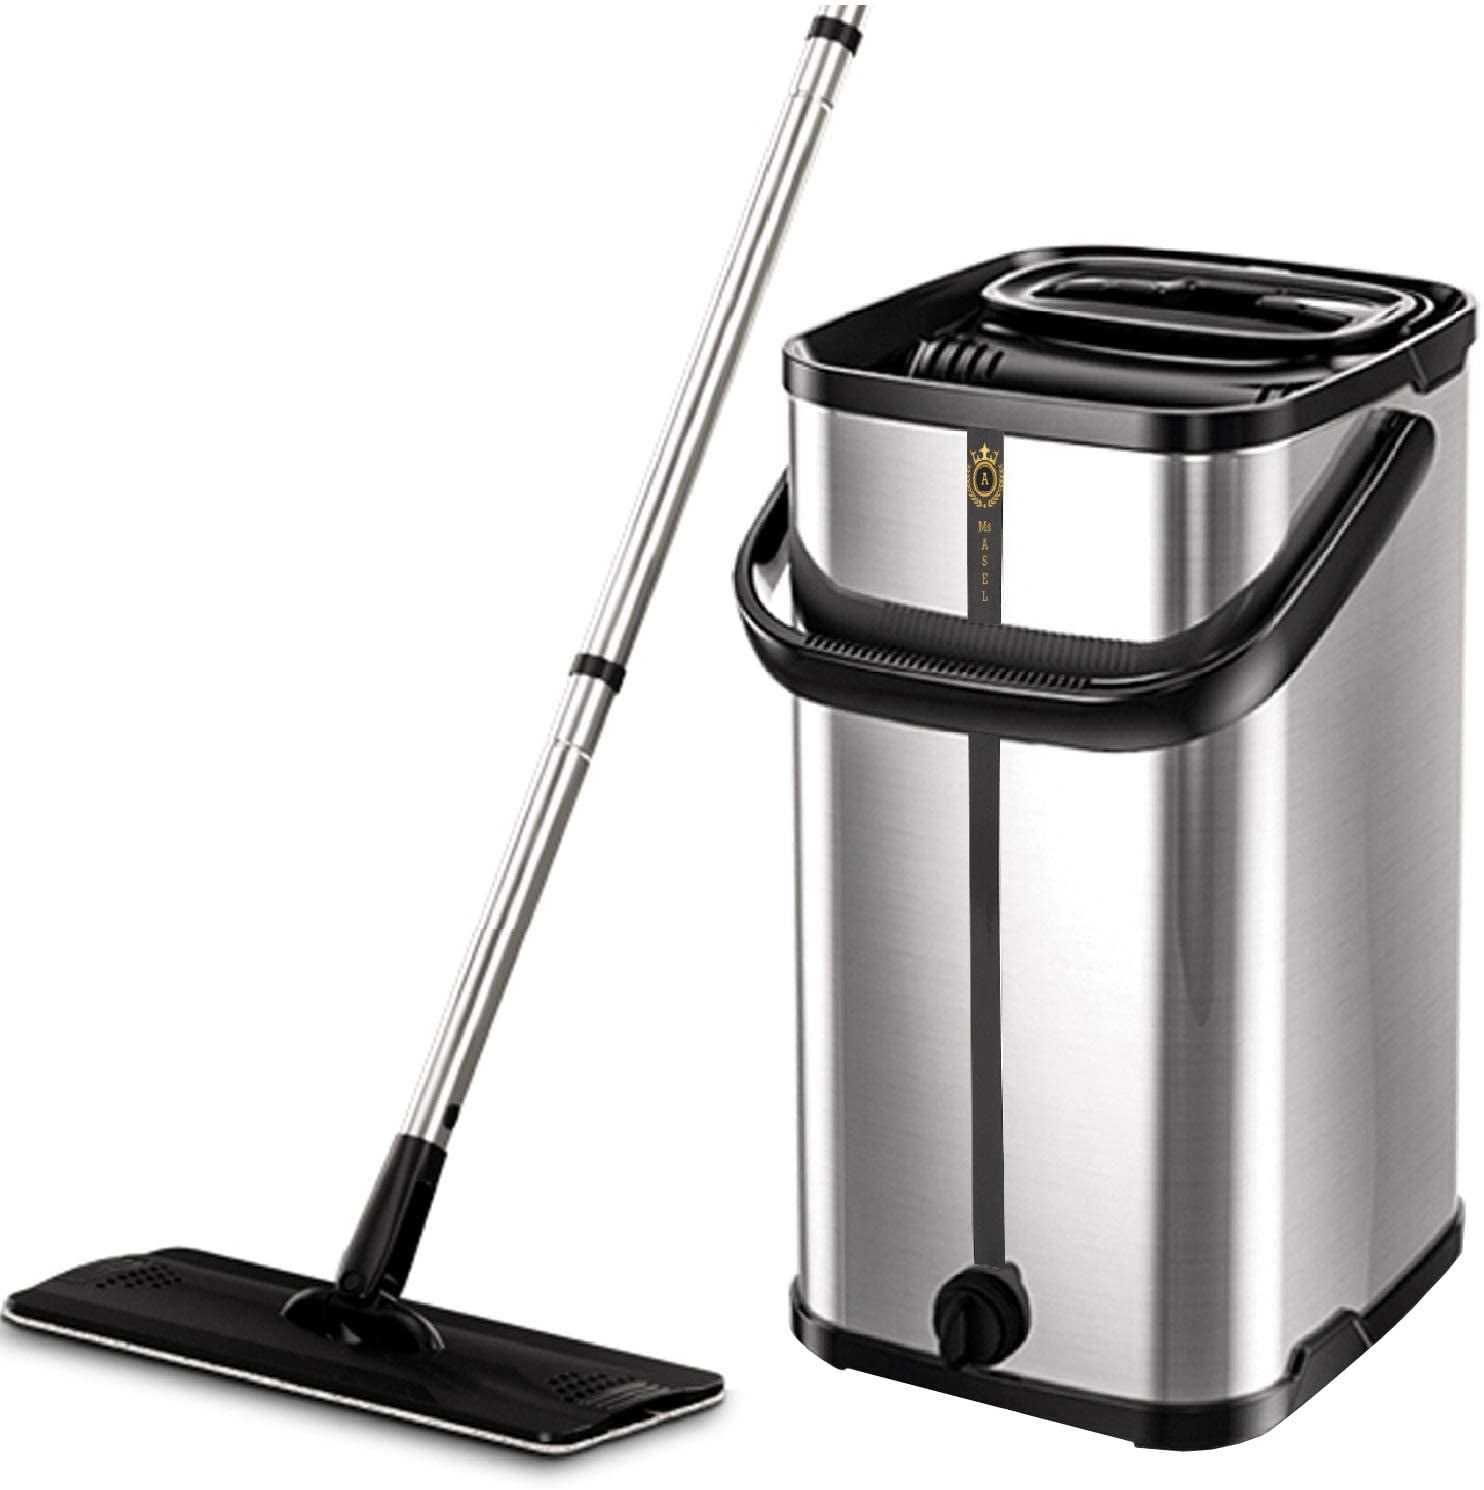 Squeeze Flat Floor Mop and Bucket Set, Stainless Steel Bucket and Handle, 2 Washable & Reusable